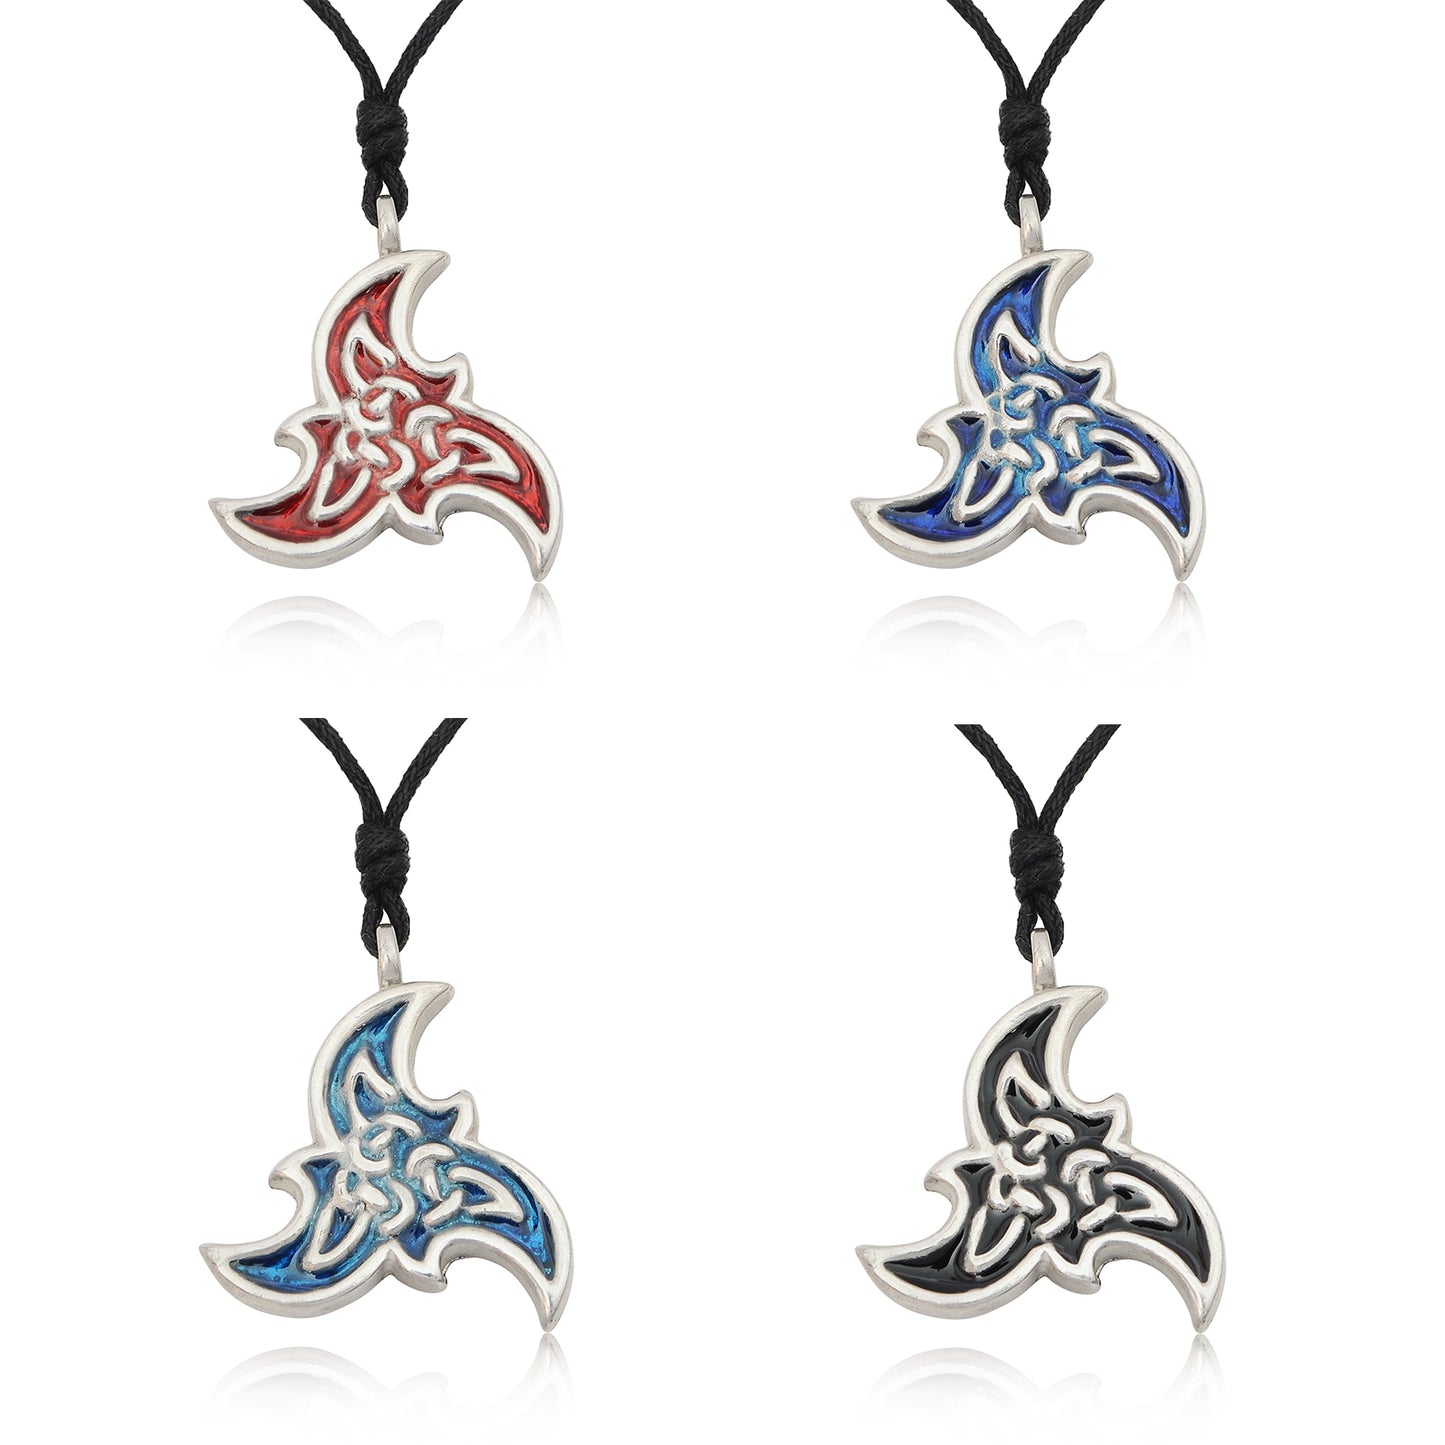 Colorful Celtic Design Silver Pewter Charm Necklace Pendant Jewelry